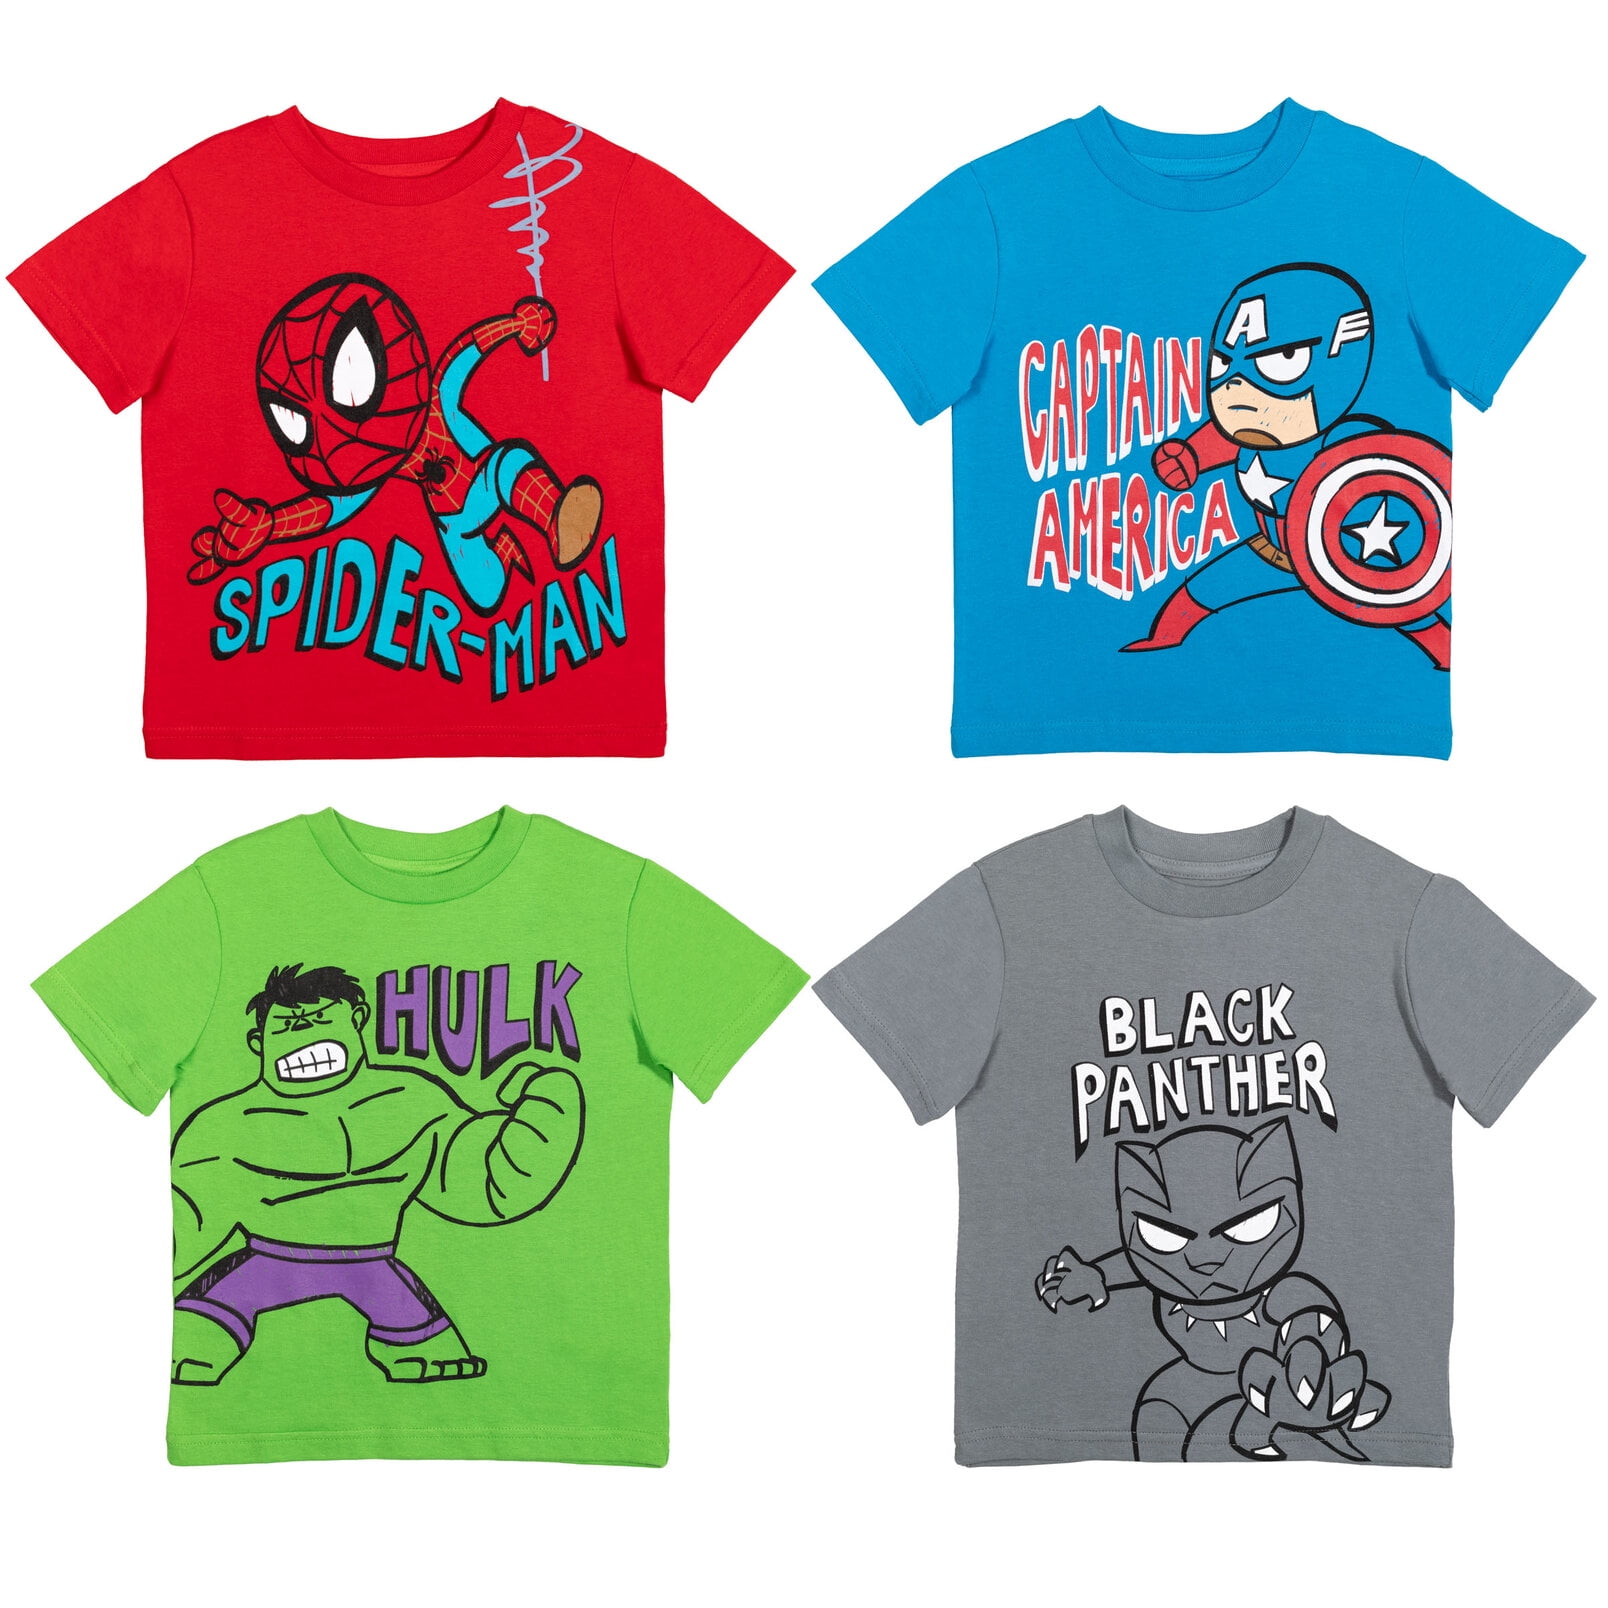 Pack Big Spider-Man Cosplay America T-Shirts Man Marvel Kid Iron Captain 4 Athletic Avengers to Toddler